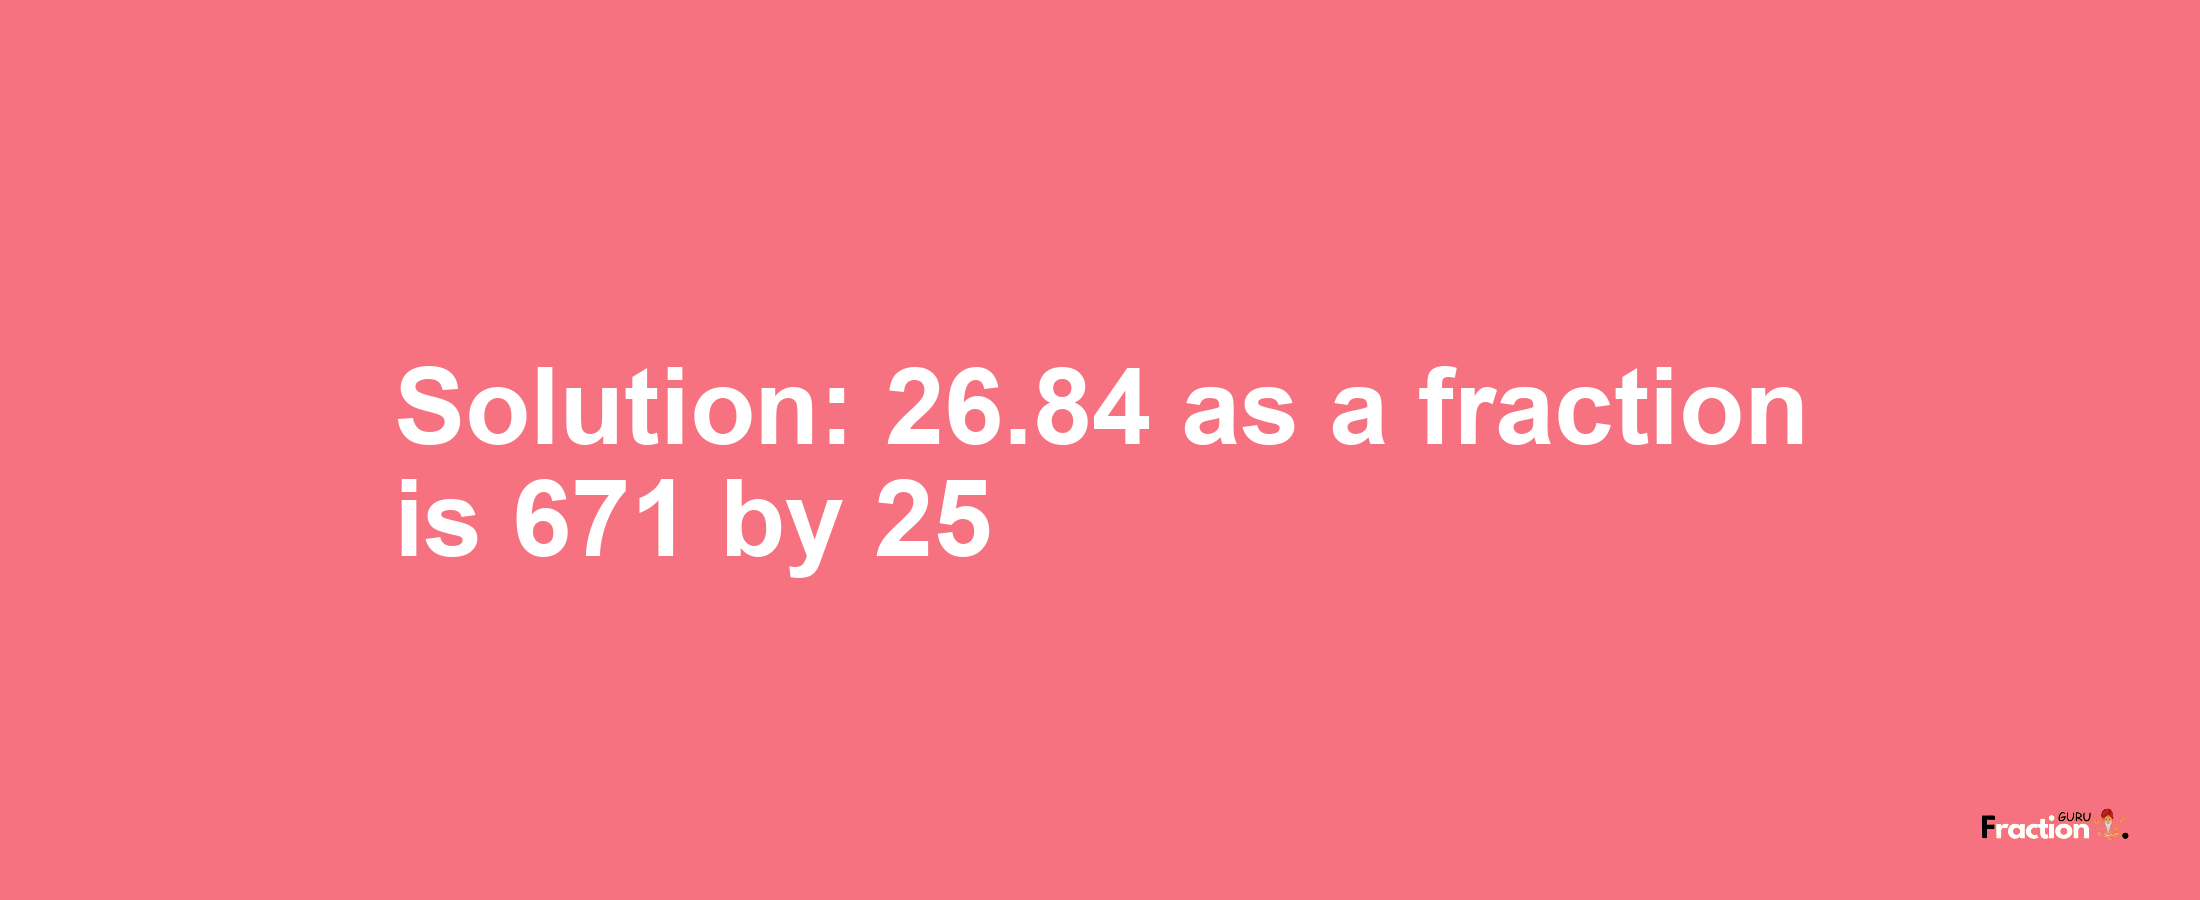 Solution:26.84 as a fraction is 671/25